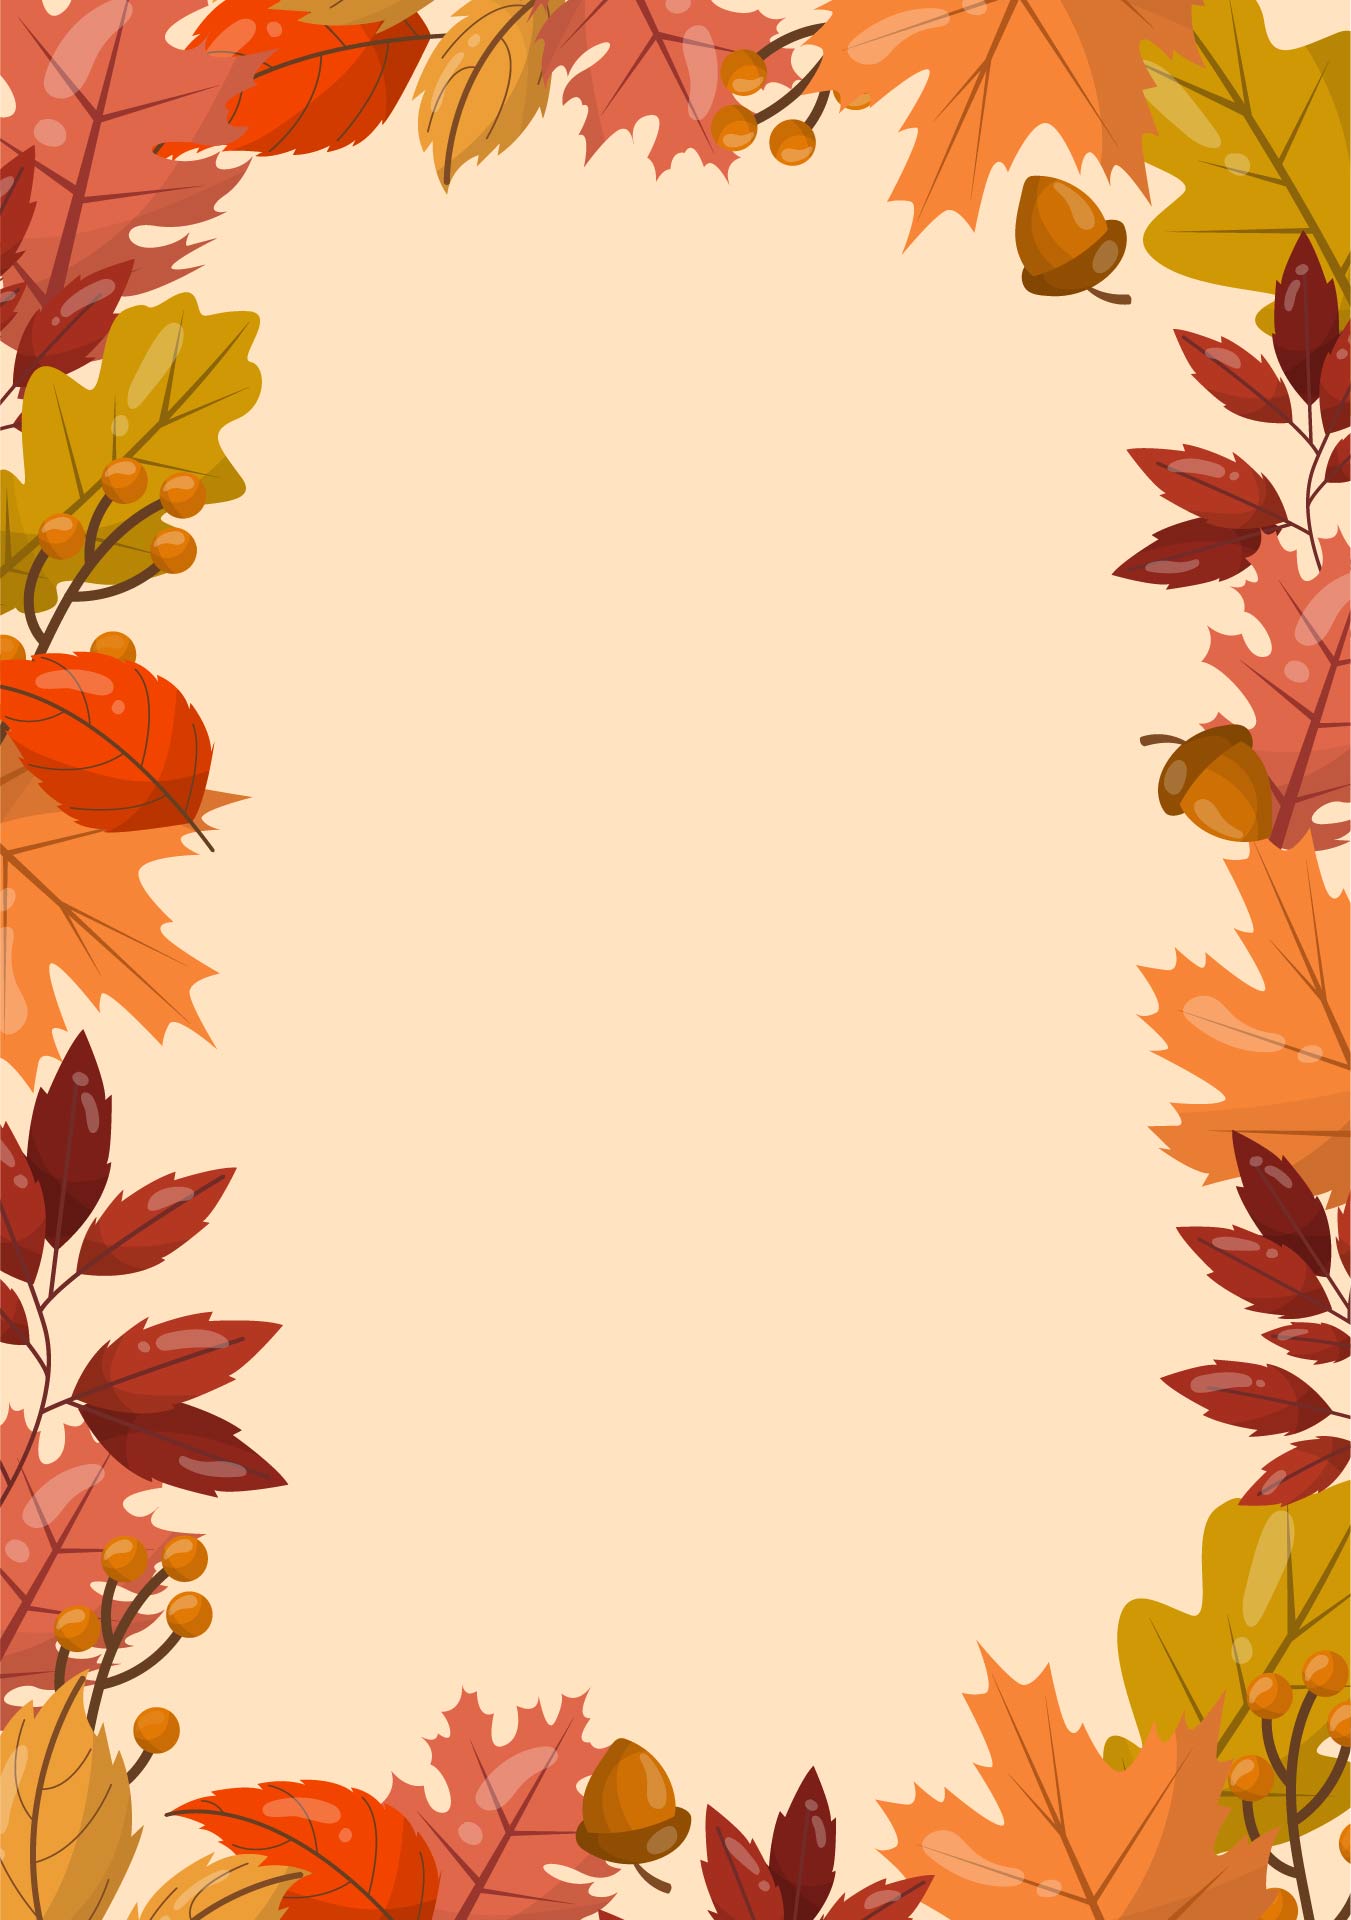 8 Best Images of Free Printable Fall Leaf Borders Free Printable Fall